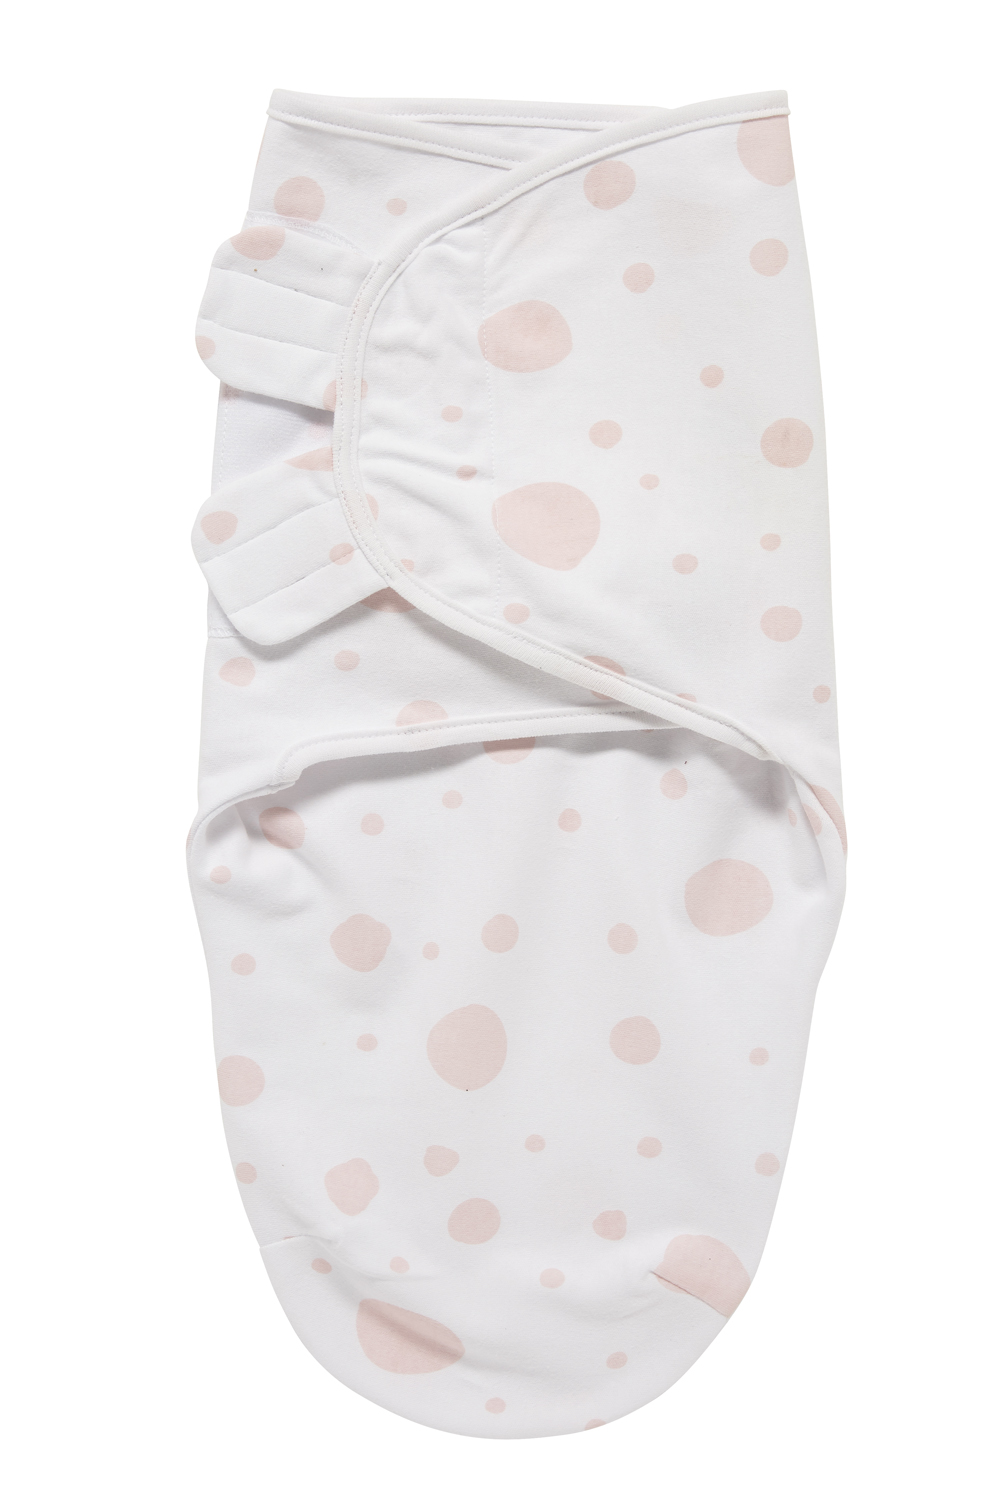 Swaddle Dots - pink - 4-6 Months